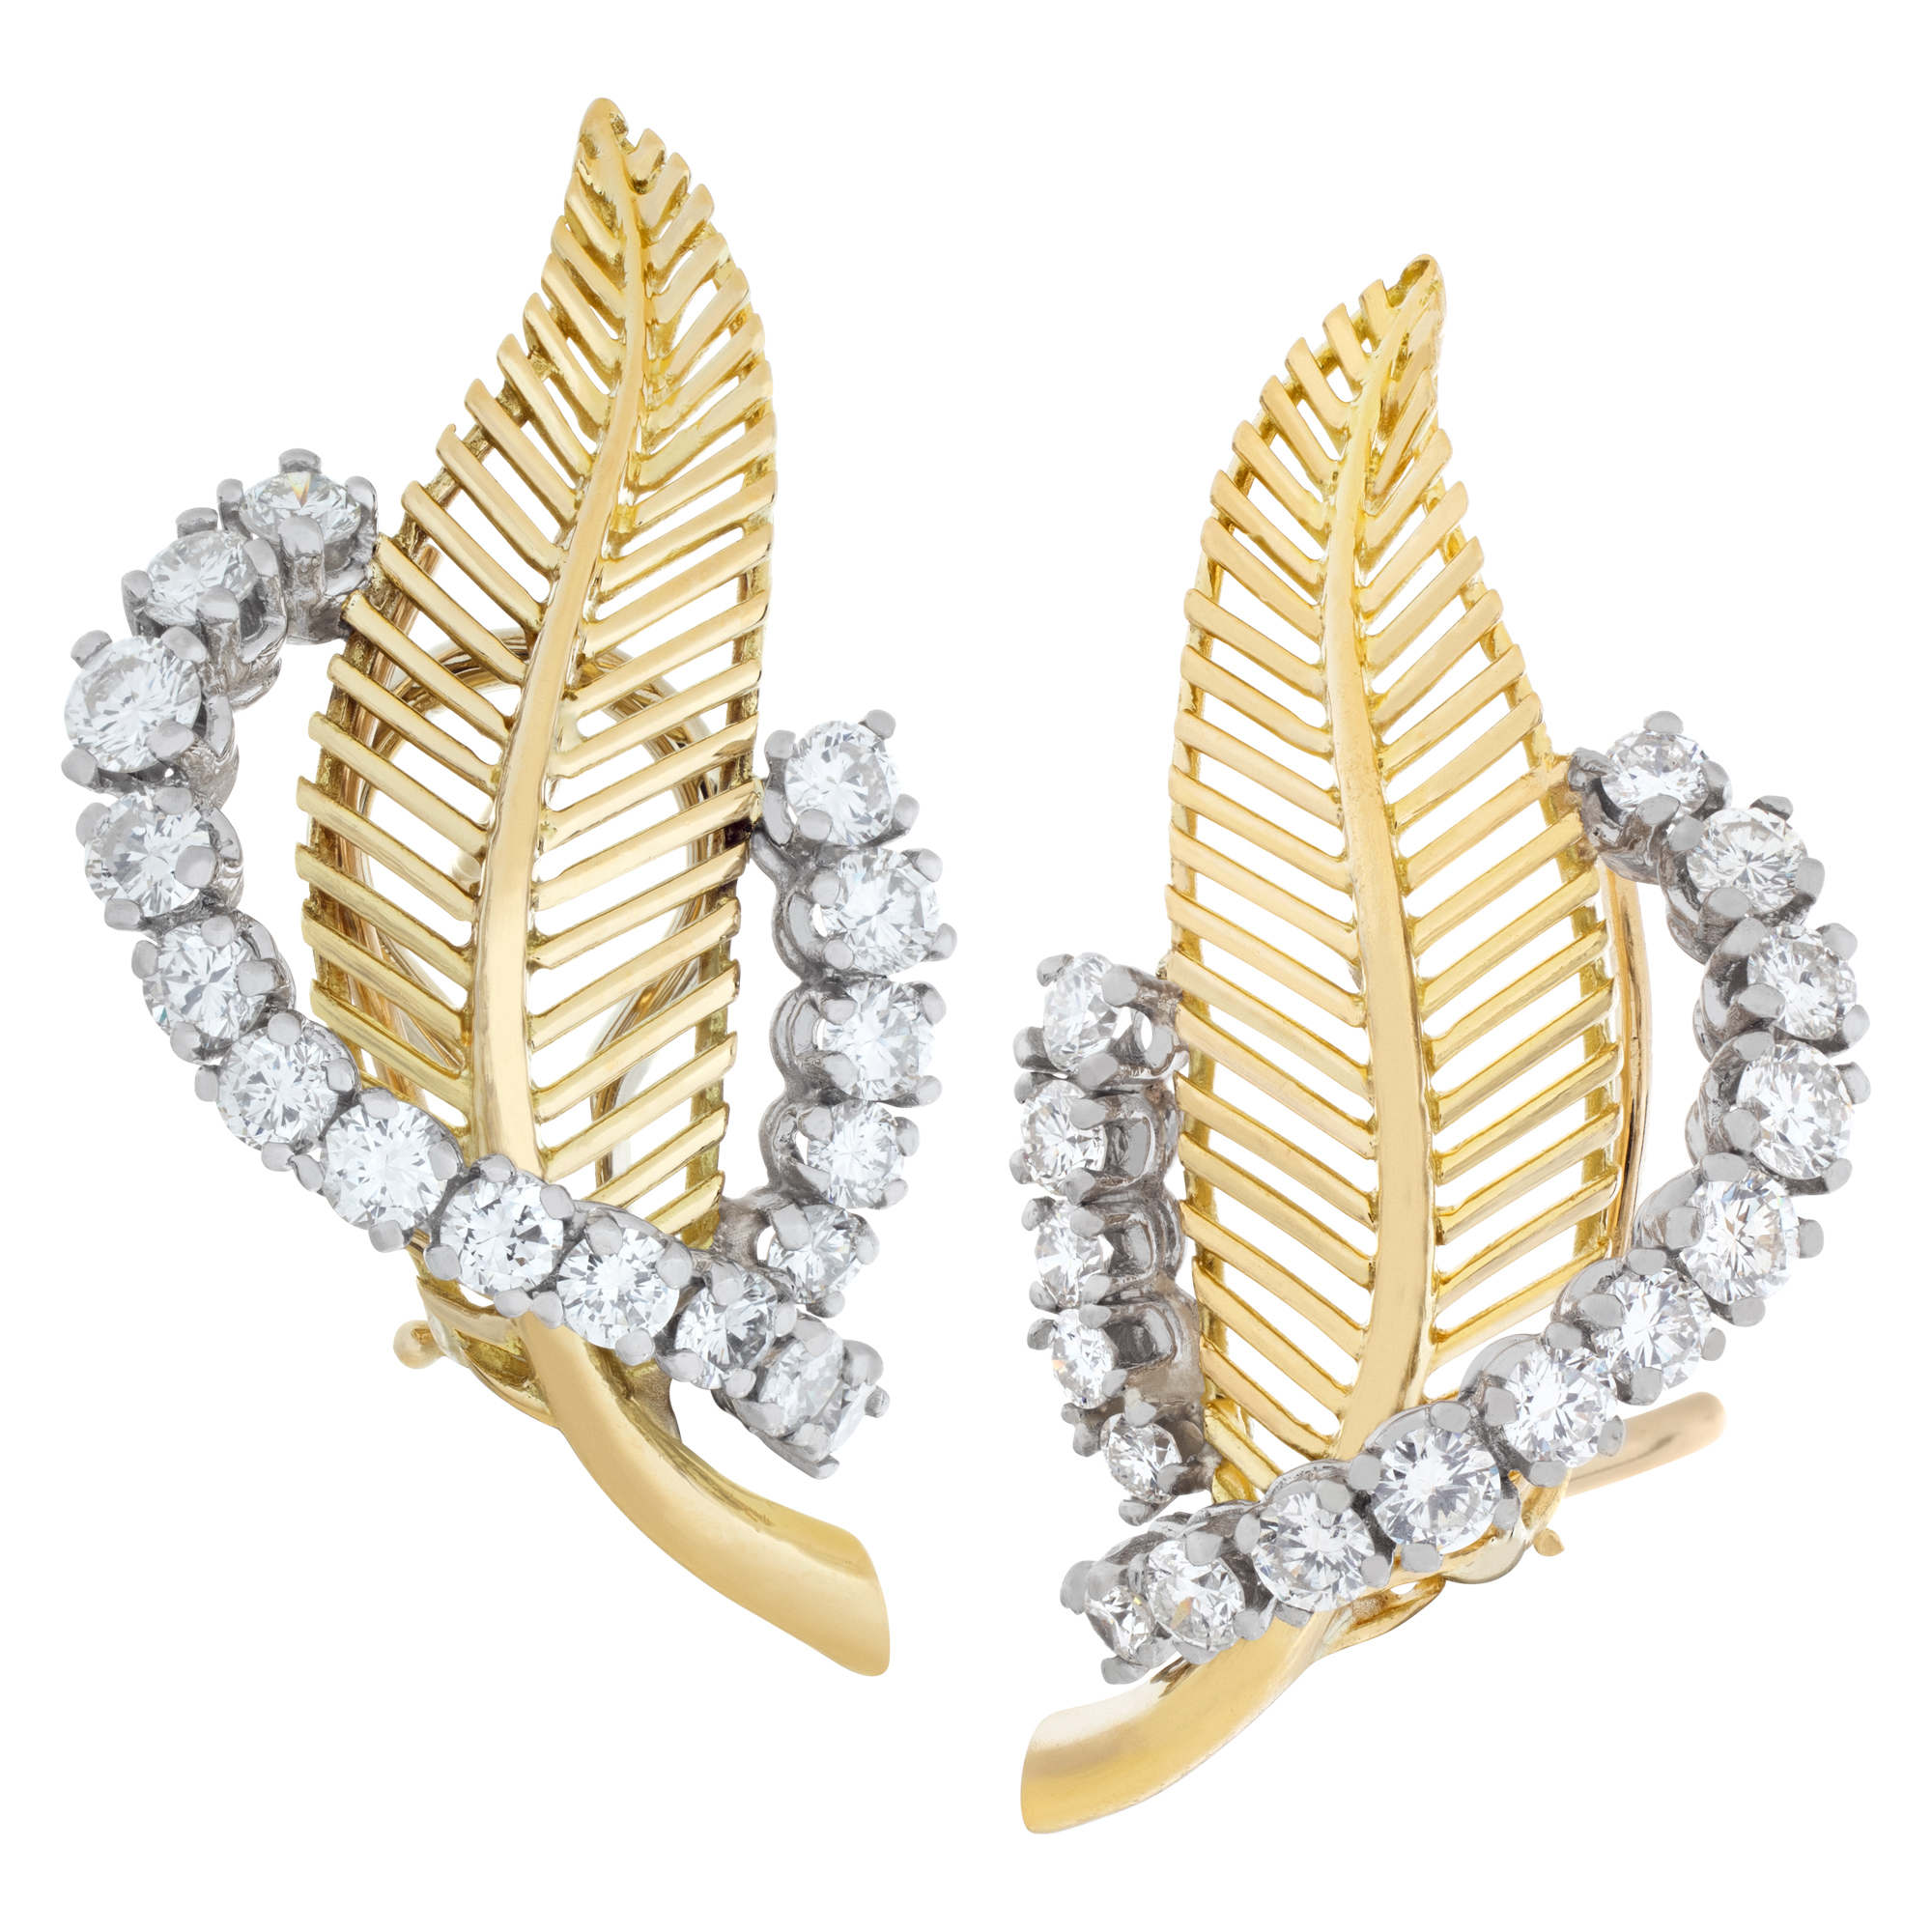 Leaf shaped diamond earrings in 18k yellow gold with Omega/post clip back.